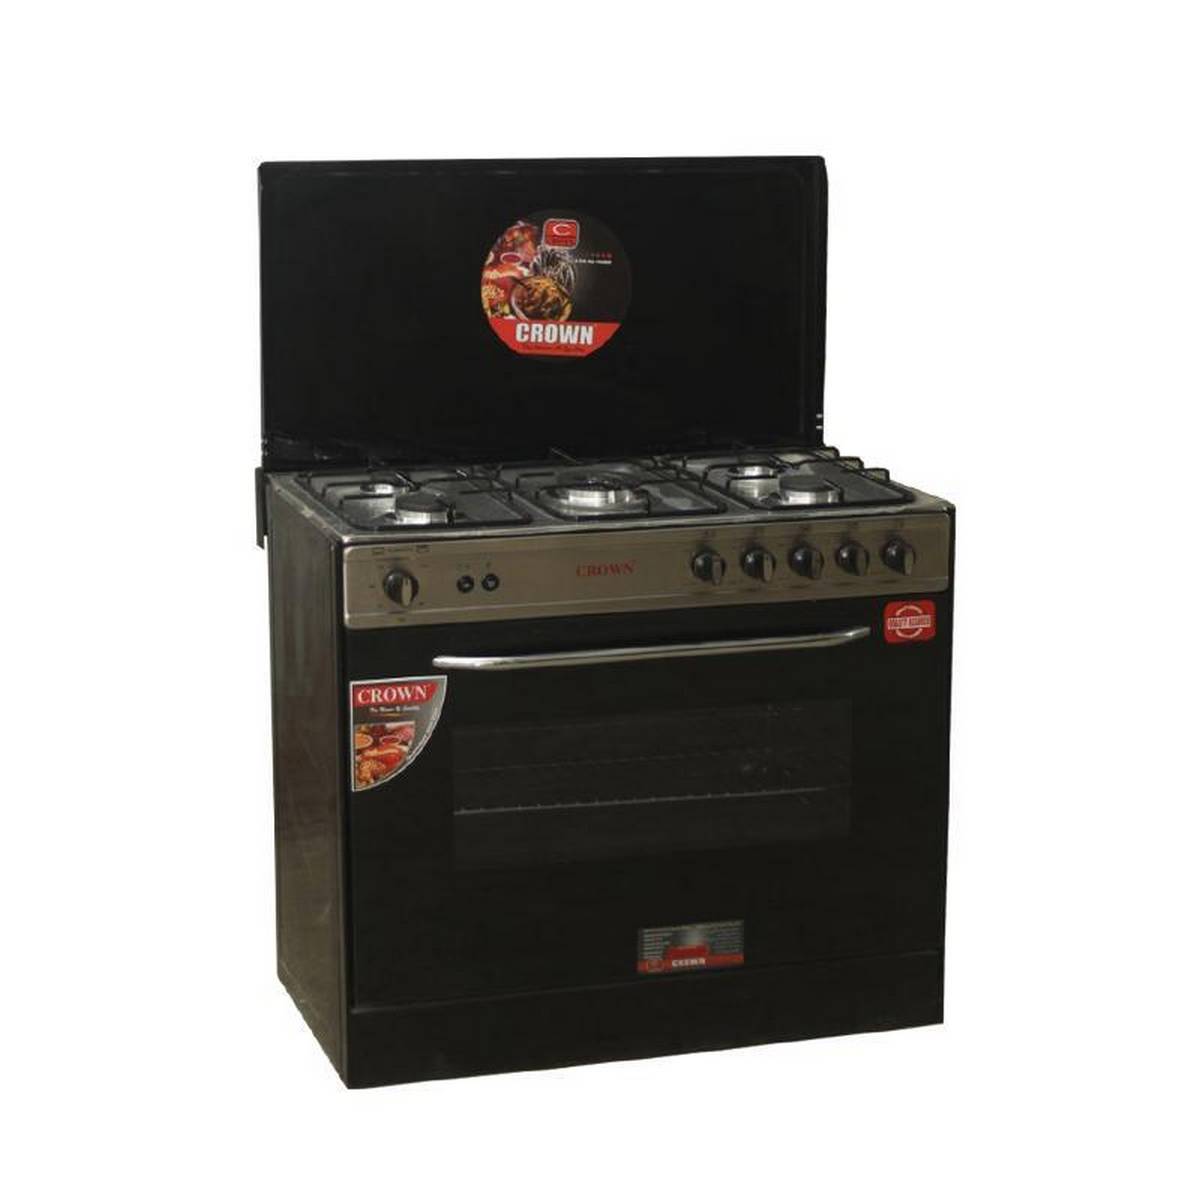 Crown Cooking Range 34inch 34"M - SS Top Non - Magnetic Auto Ignition Five Burner Tempered Glass 1 Year Brand Warranty